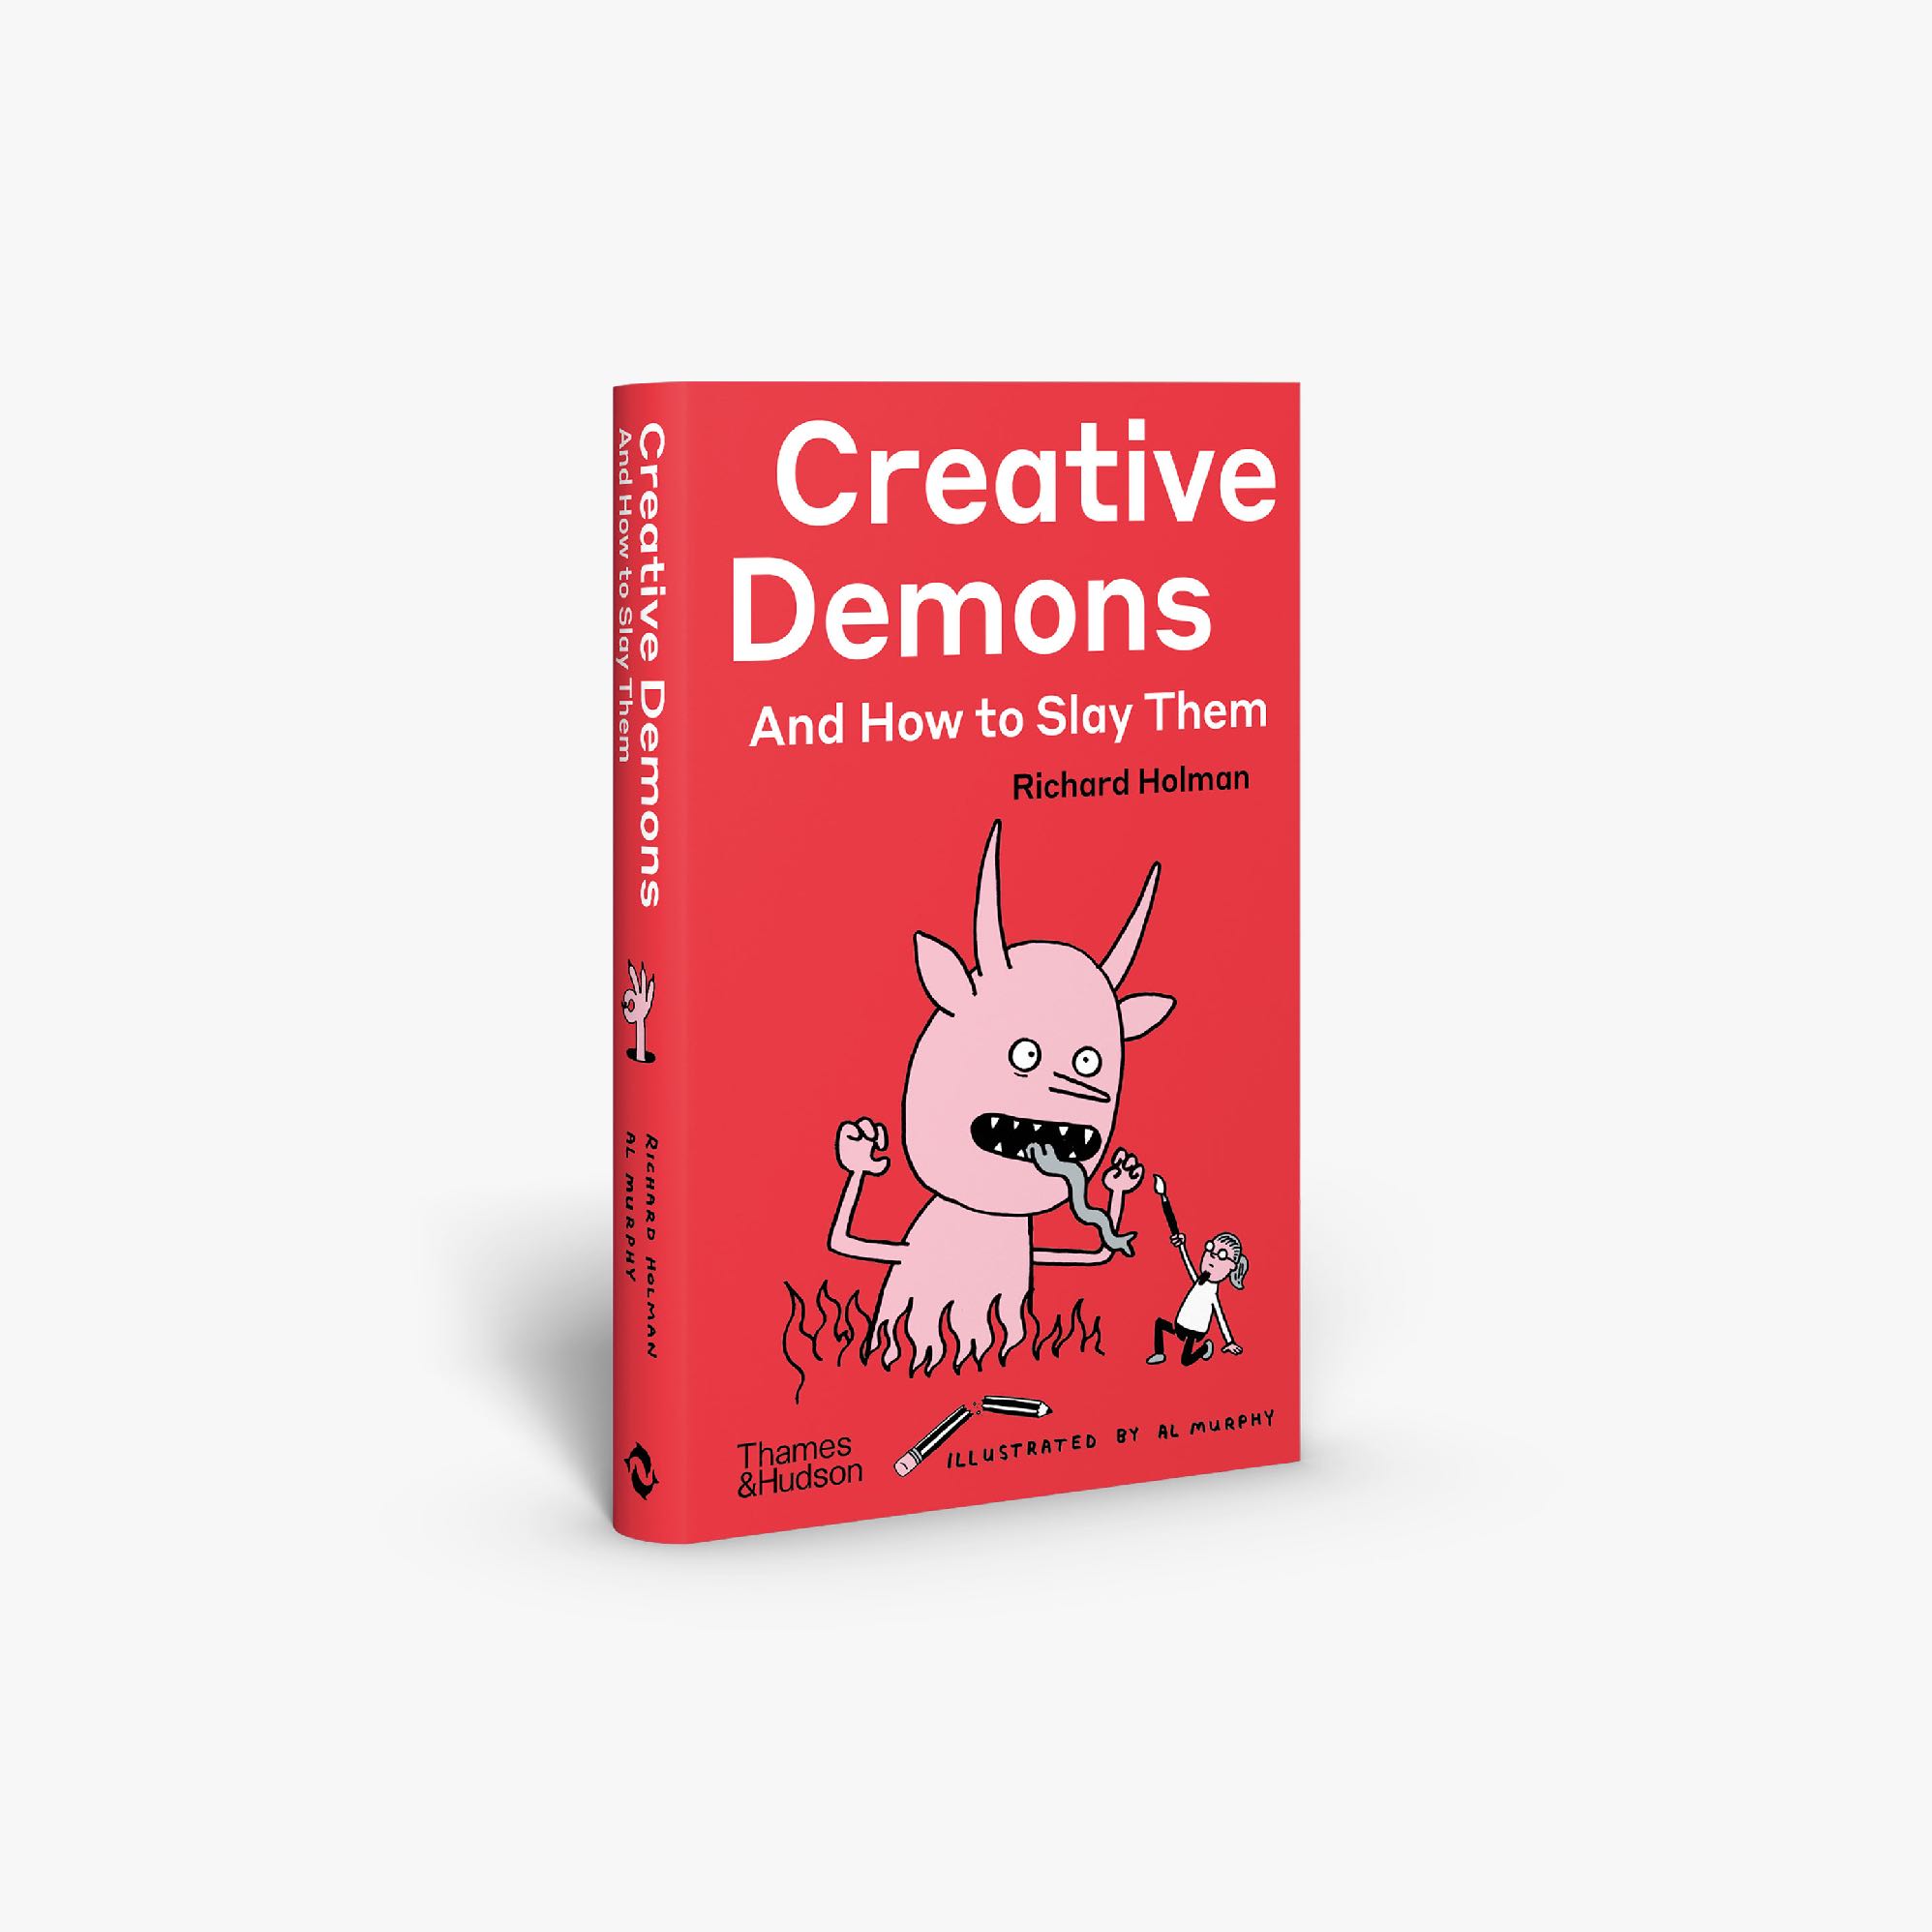 The cover of my book Creative Demons & How to Slay Them